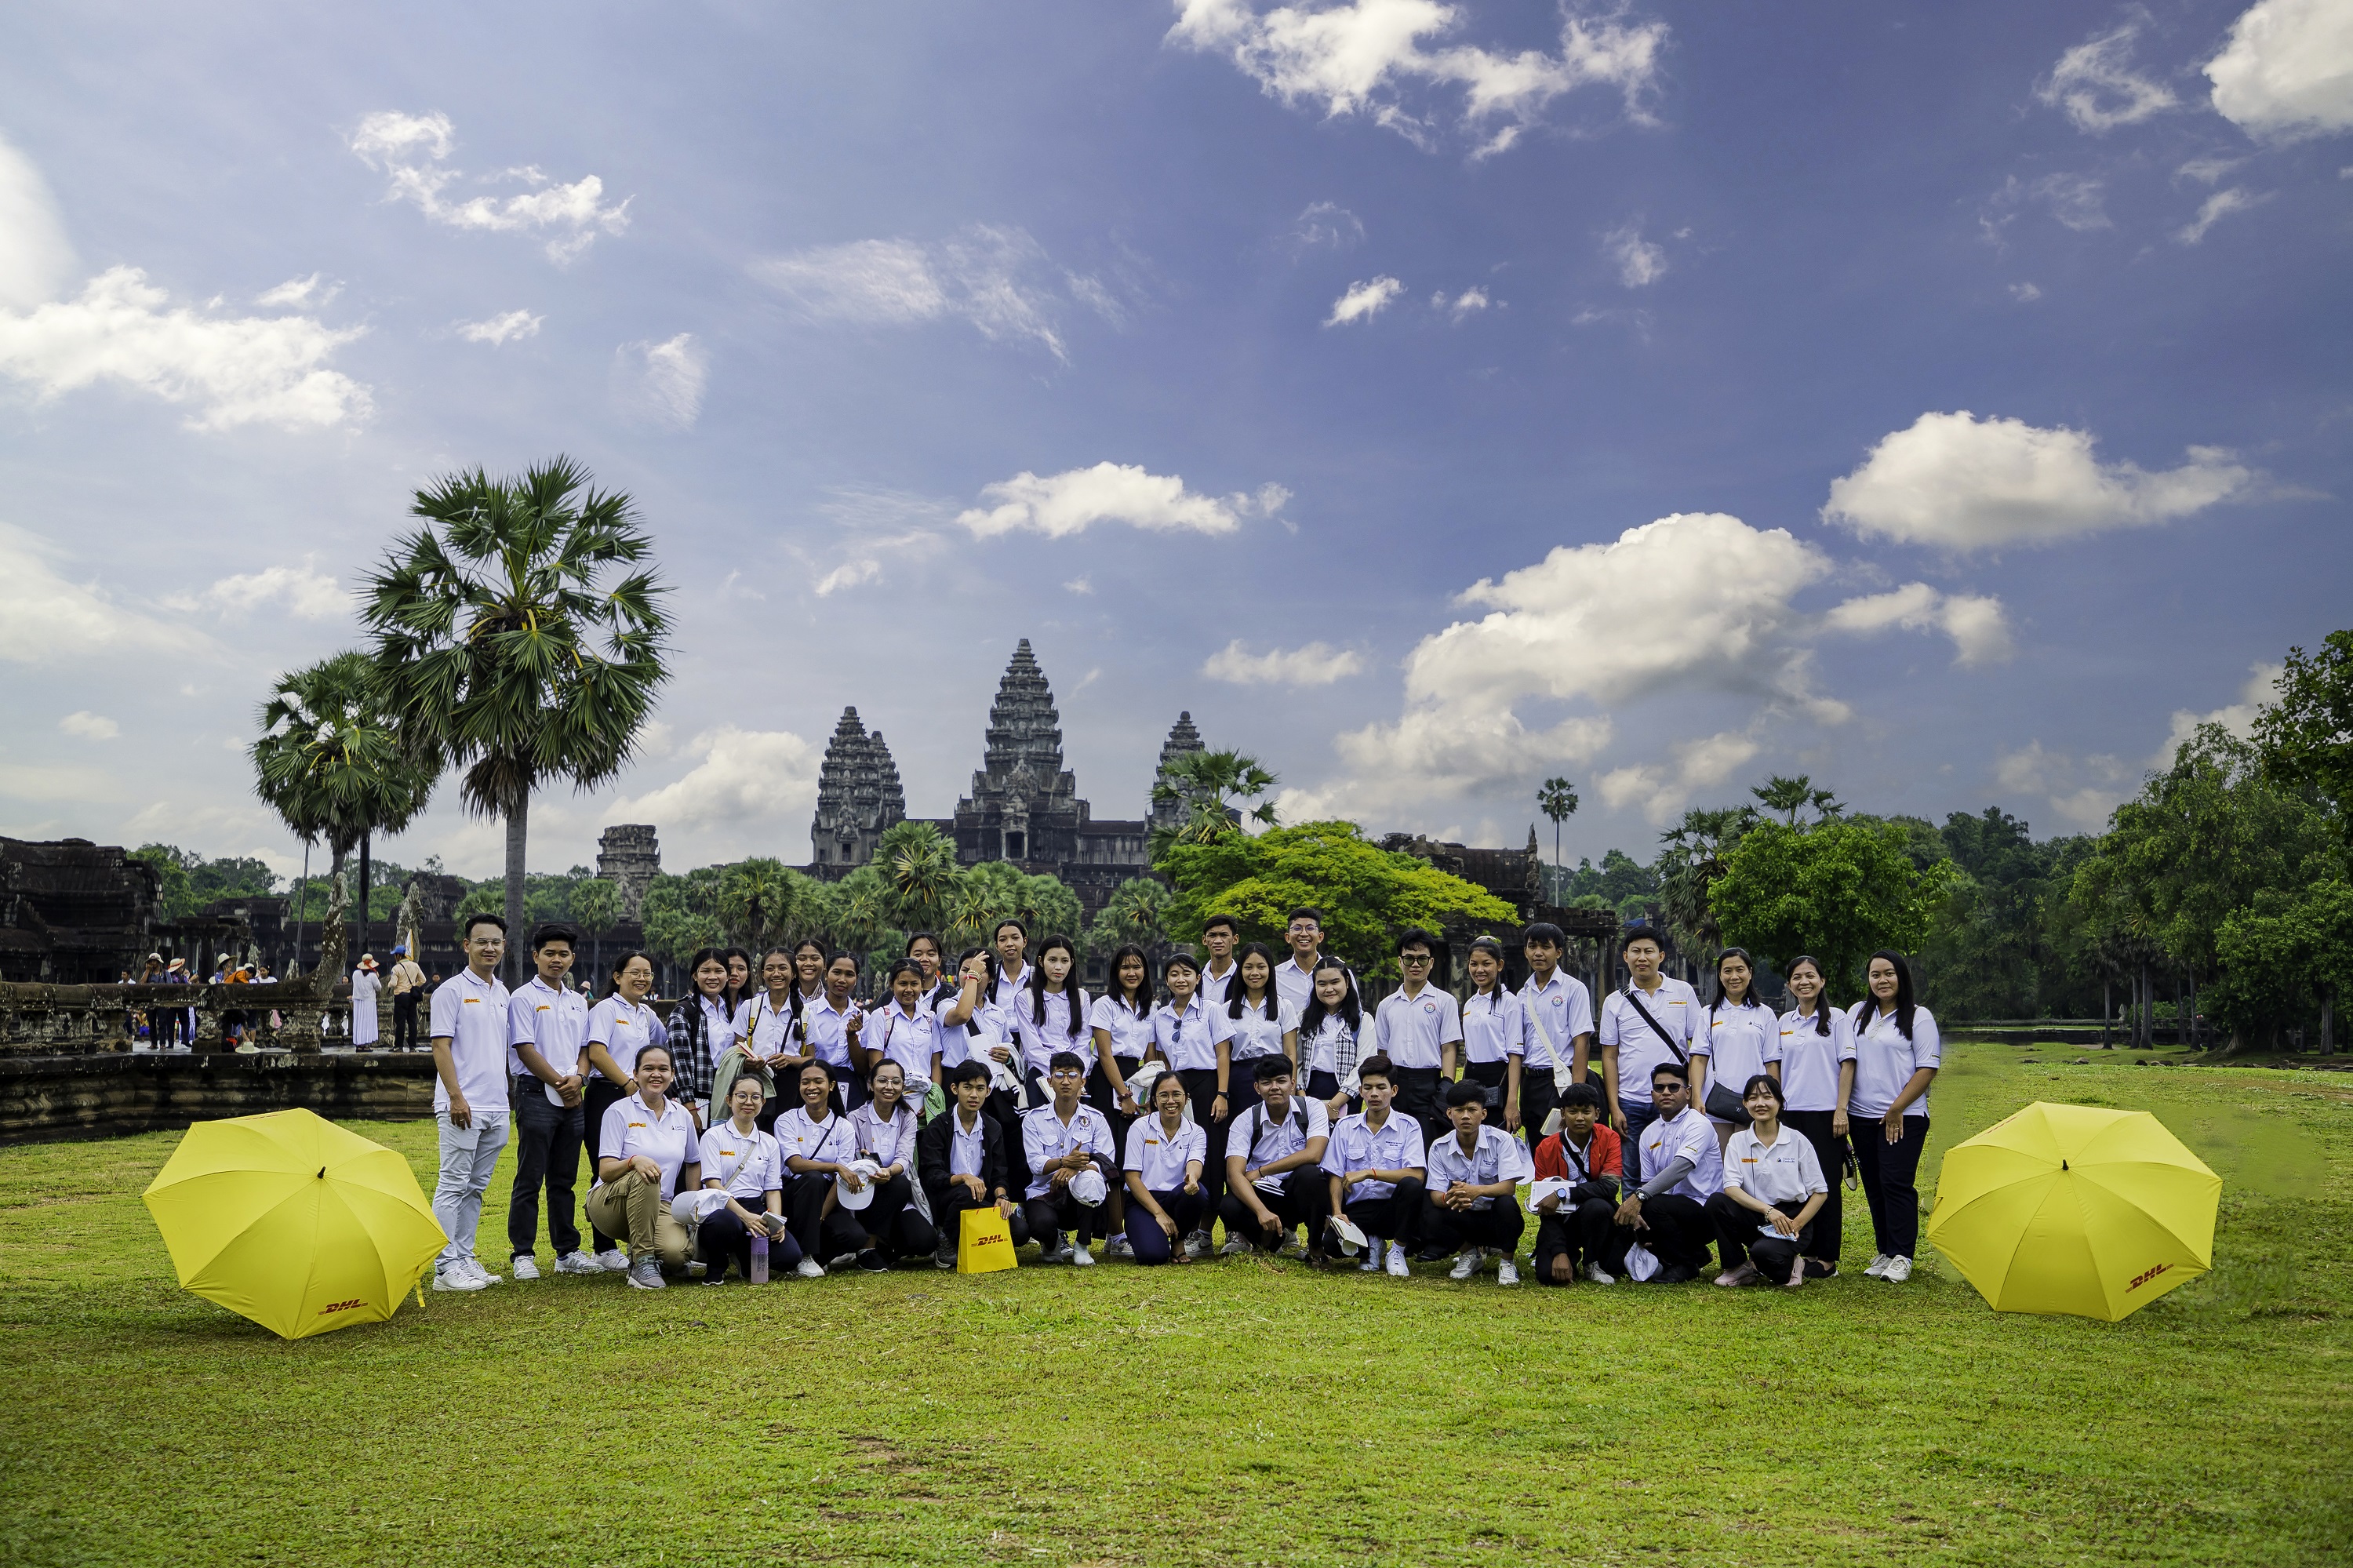 DHL Celebrates Five-Year Partnership with Teach For Cambodia